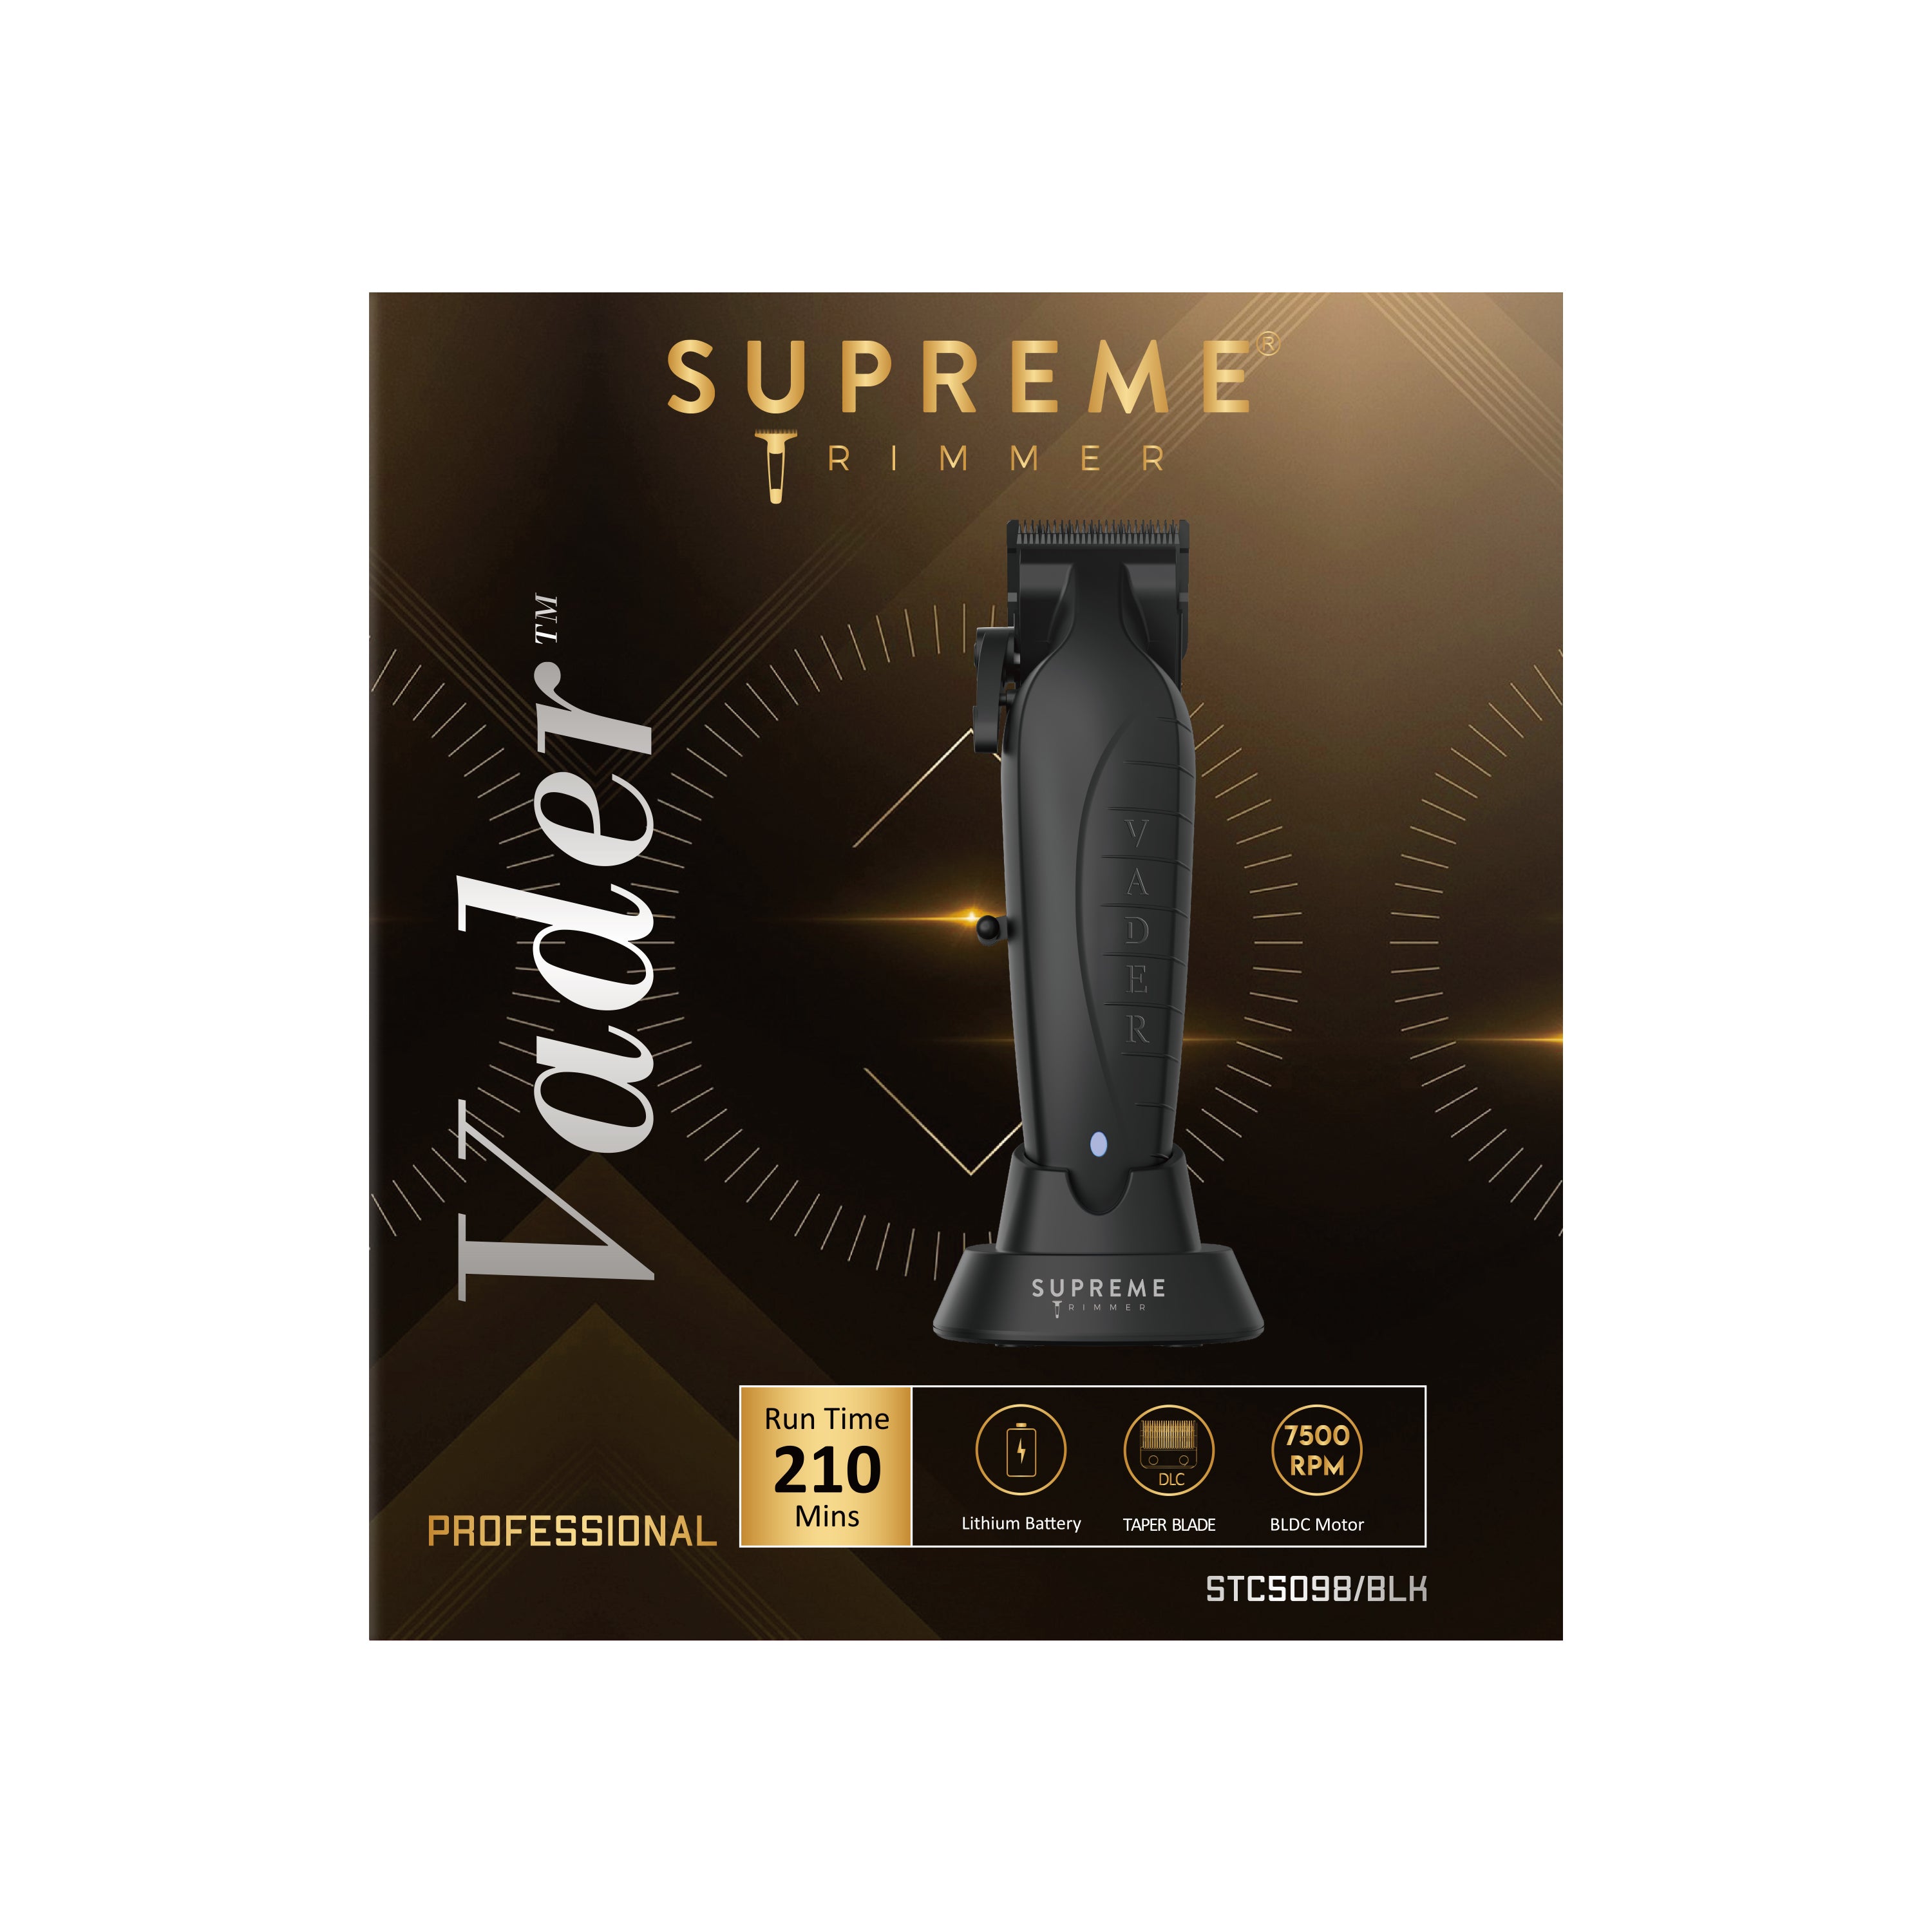 Vader™ Clipper (Ships week of 7/19) - Hair Clippers & Trimmers - Supreme Trimmer Mens Trimmer Grooming kit 